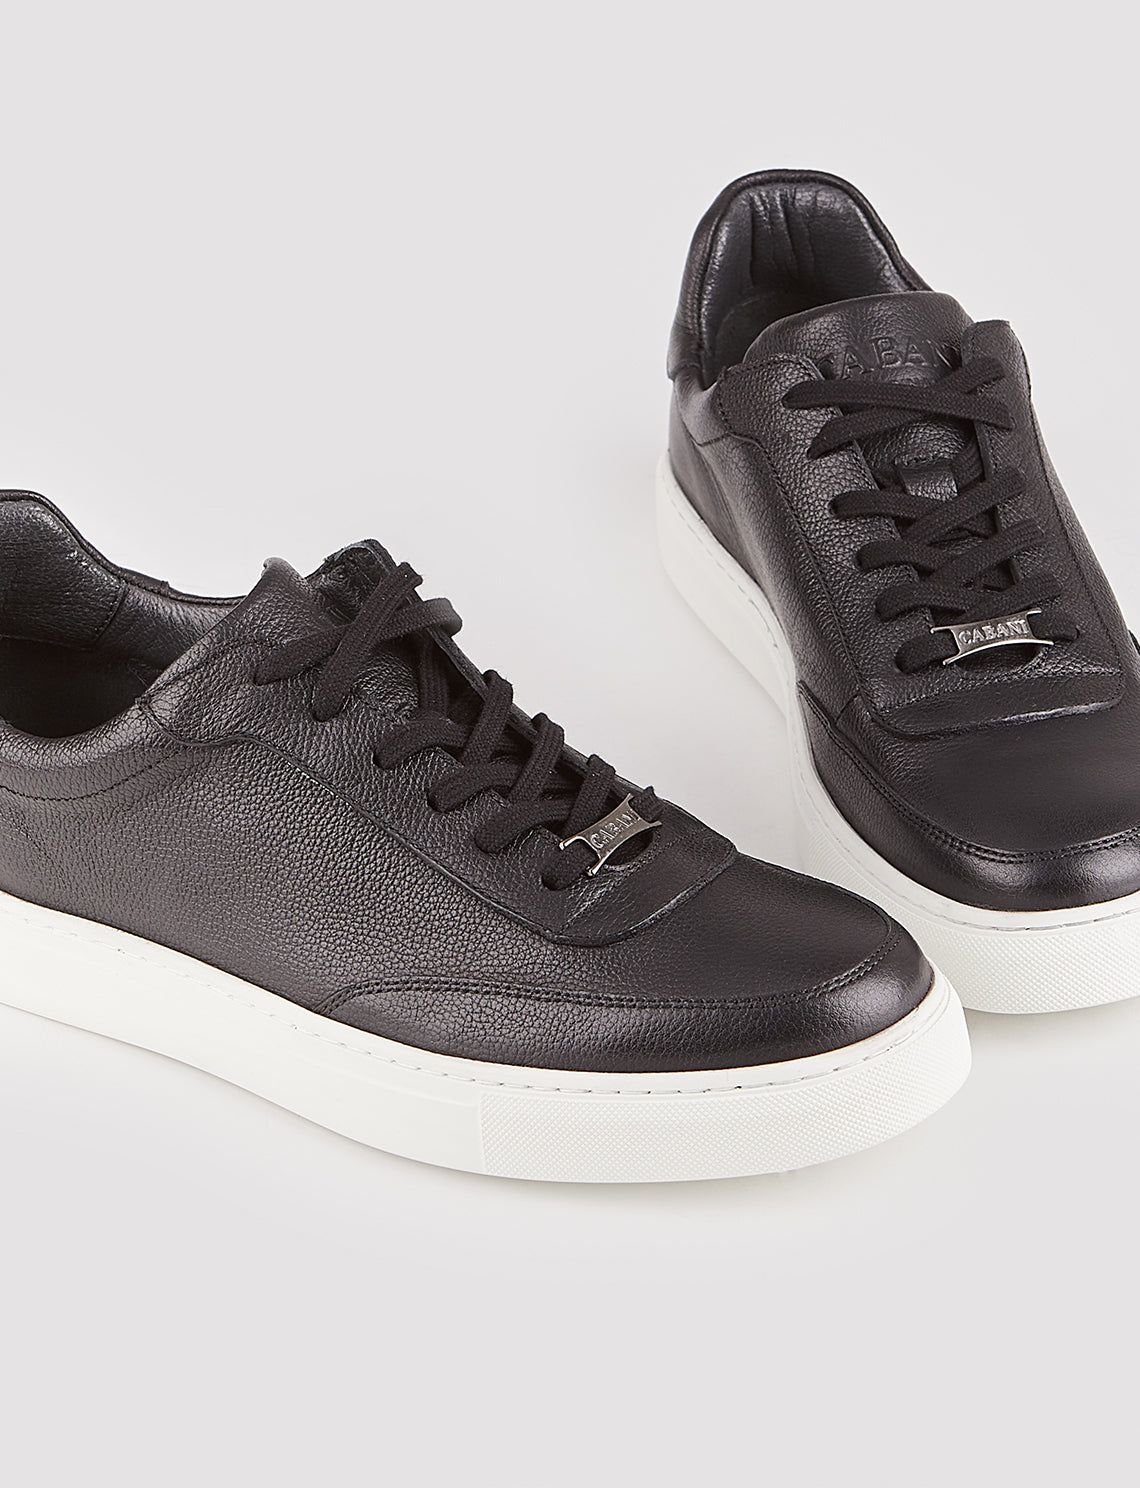 Men Black Genuine Leather Low Top Lace Up Skate Shoes